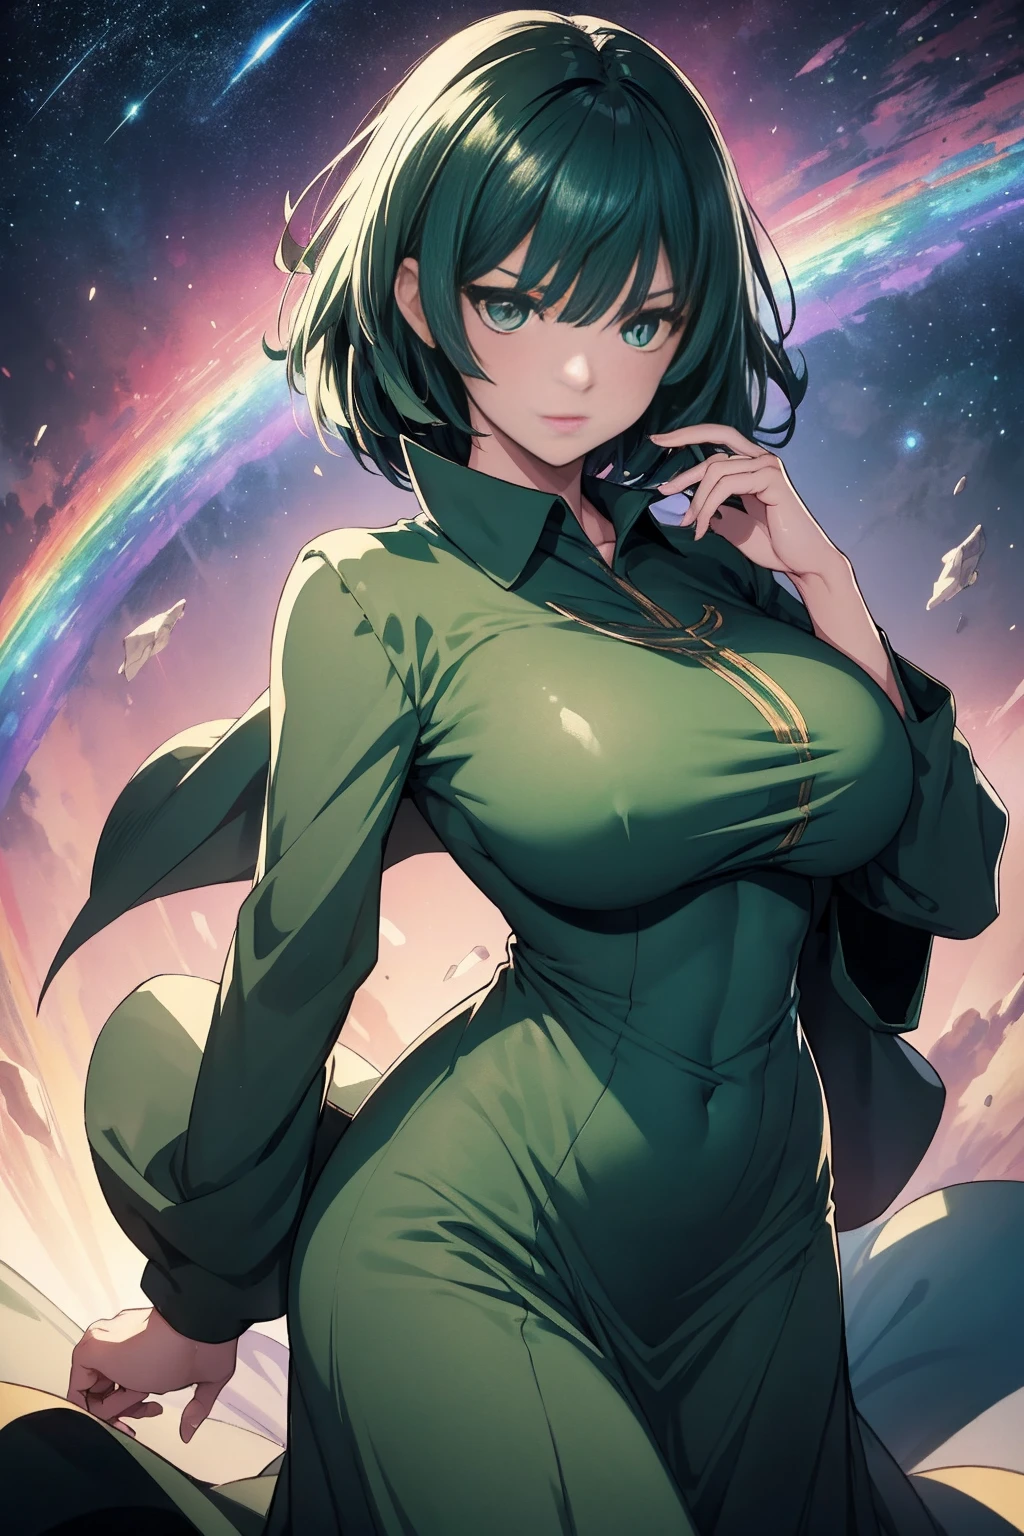 fubuki,1girl in, Girl with emerald green colored hair and detailed teal dress uniform, rainbow colored cosmic nebula background, Stars, intergalactic, Intricate details, Perfect face, Dark green hair, Long hair, Green eyes, Anime beautiful girl wearing a red uniform, a miniskirt, Absolute area, A slight smil, Perfect Anatomy, Perfect face:1.1), ((Big Tits!!!!!!)),(huge-breasted!!!!), (Full body shot), Looking at Viewer, Ultra-high definition, (1girl in:1.4), Extremely detailed illustration, Smooth, Very perfect pixel, Seductive,venusbody,